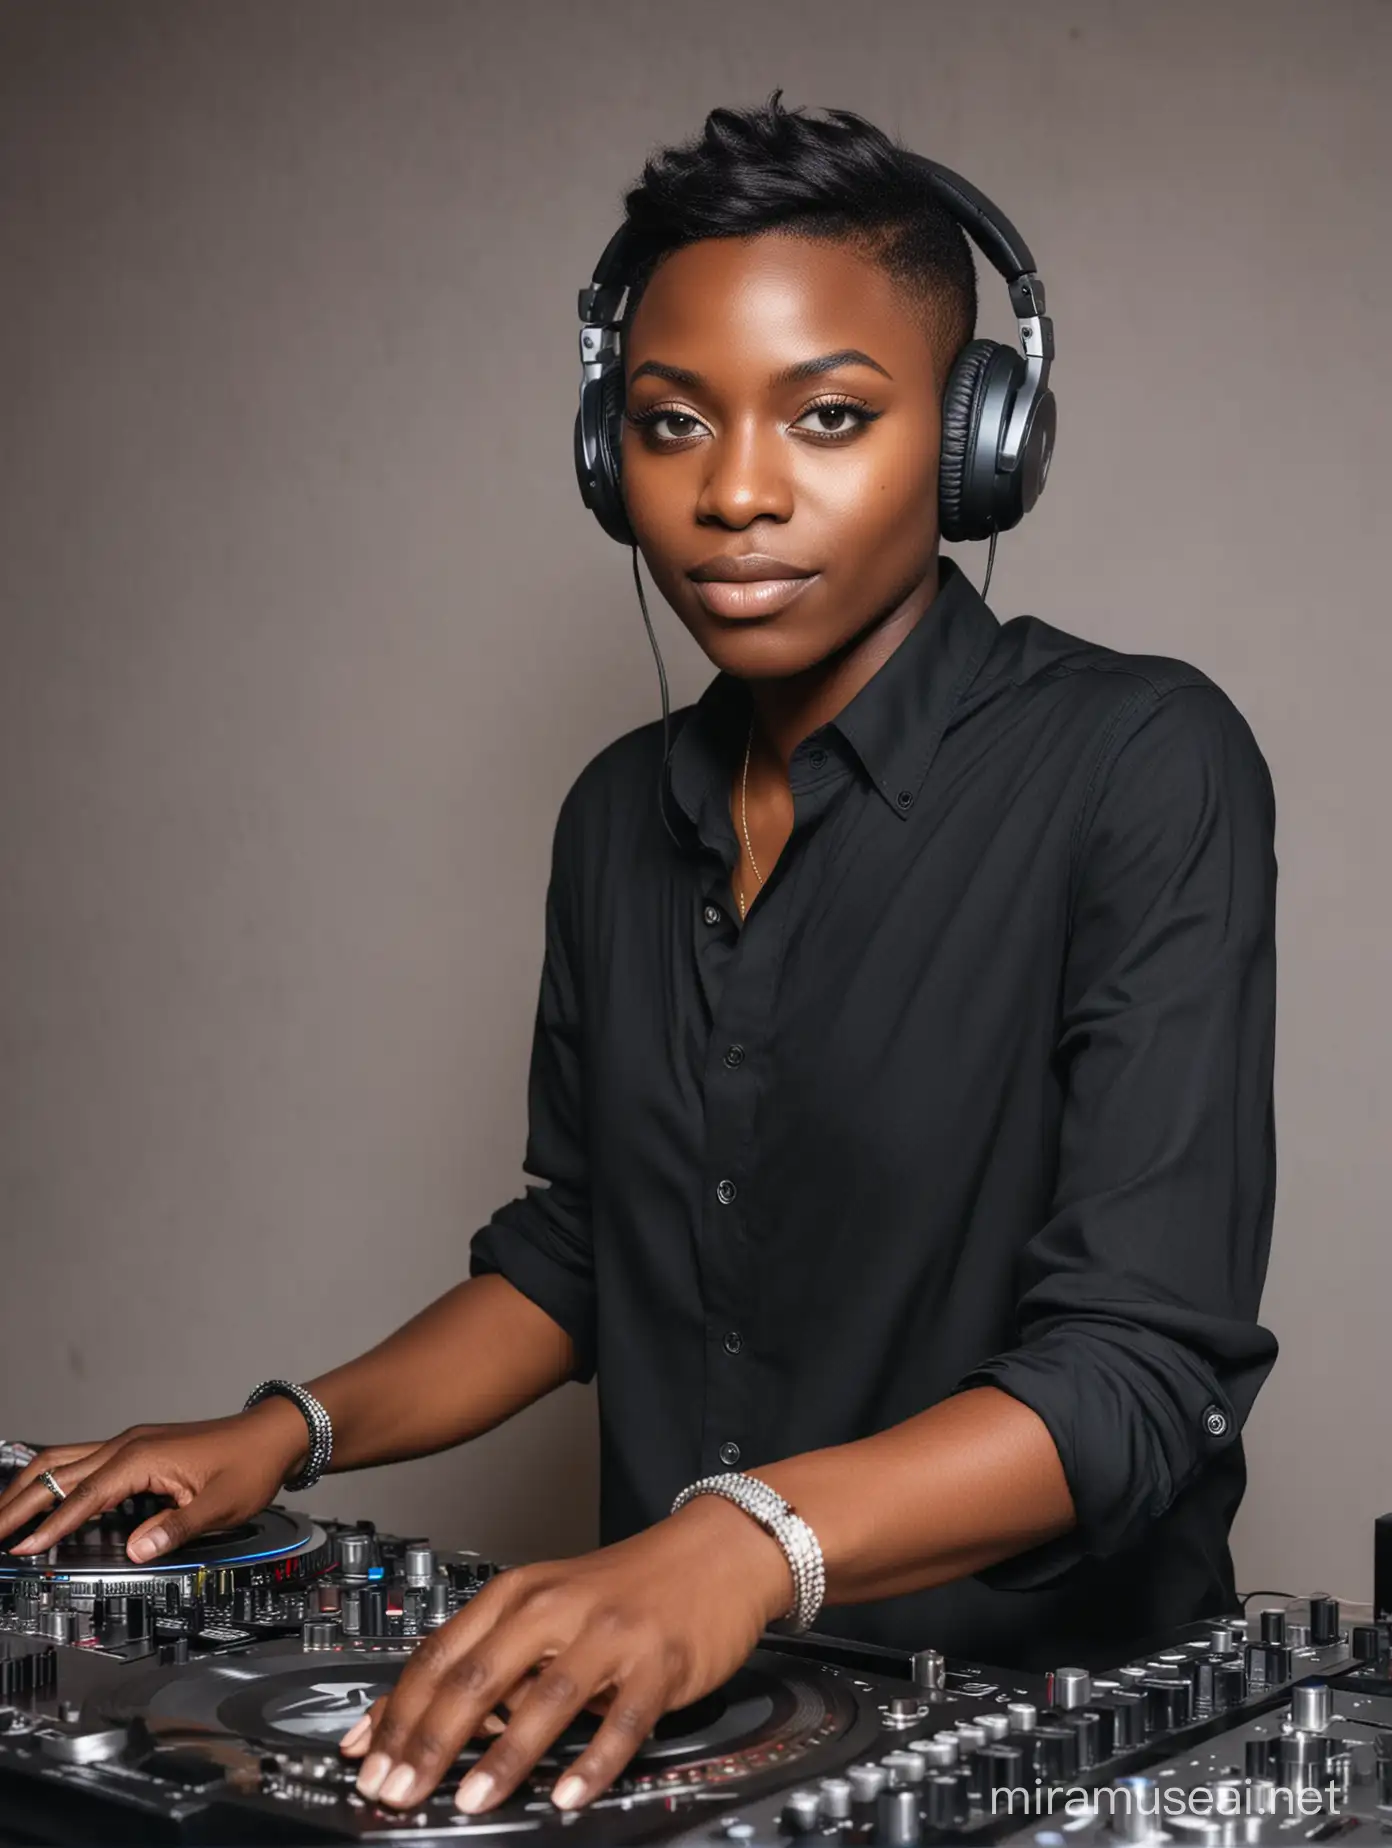 Nigerian, 27 year old androgynous DJ, close cropped hair, in front of turntables at a party